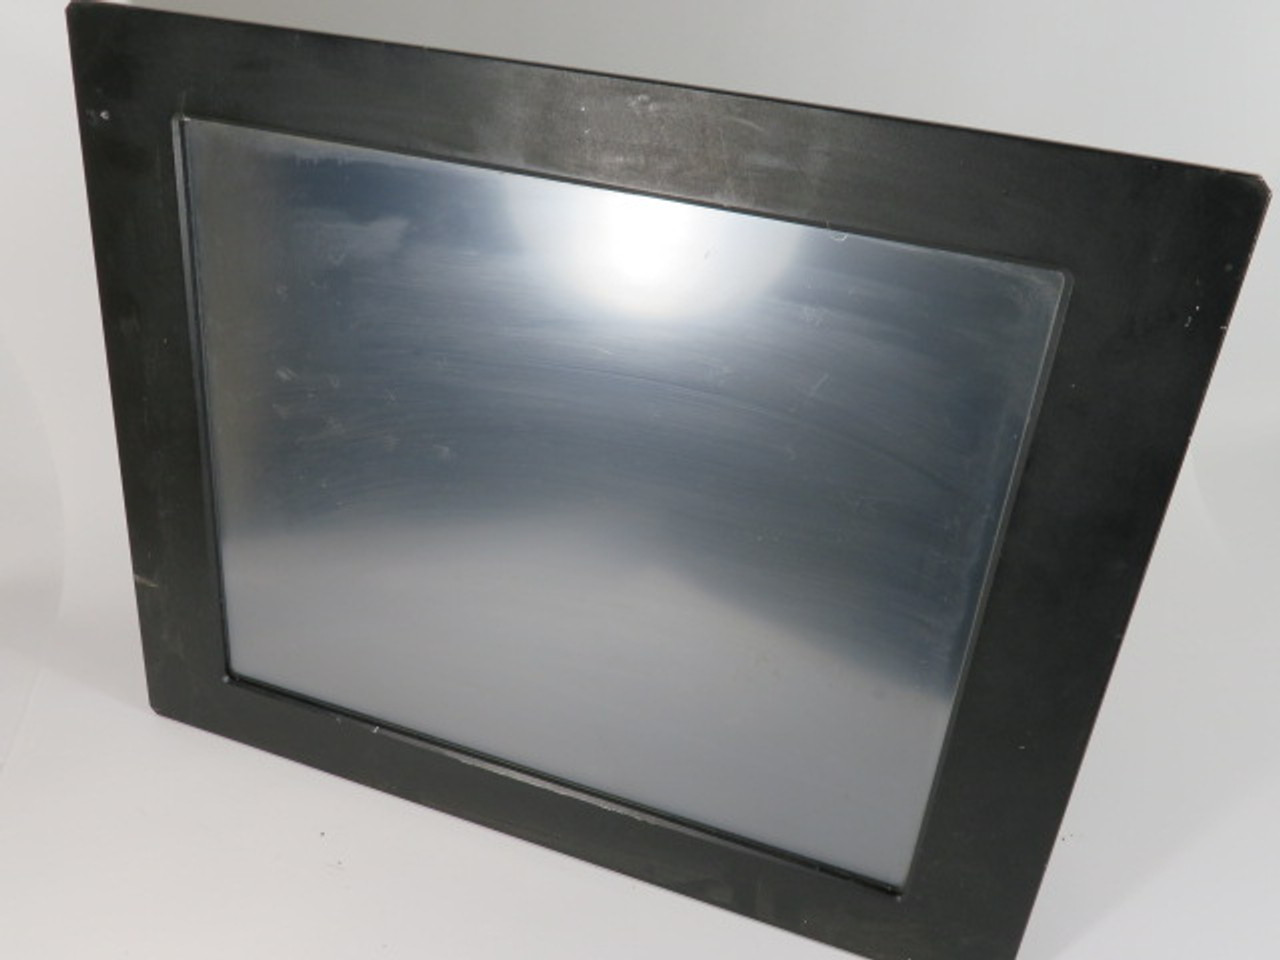 IBT IBT5019Q Touch Screen Panel PC 110-240V POWERS ON NO DISPLAY ! AS IS !